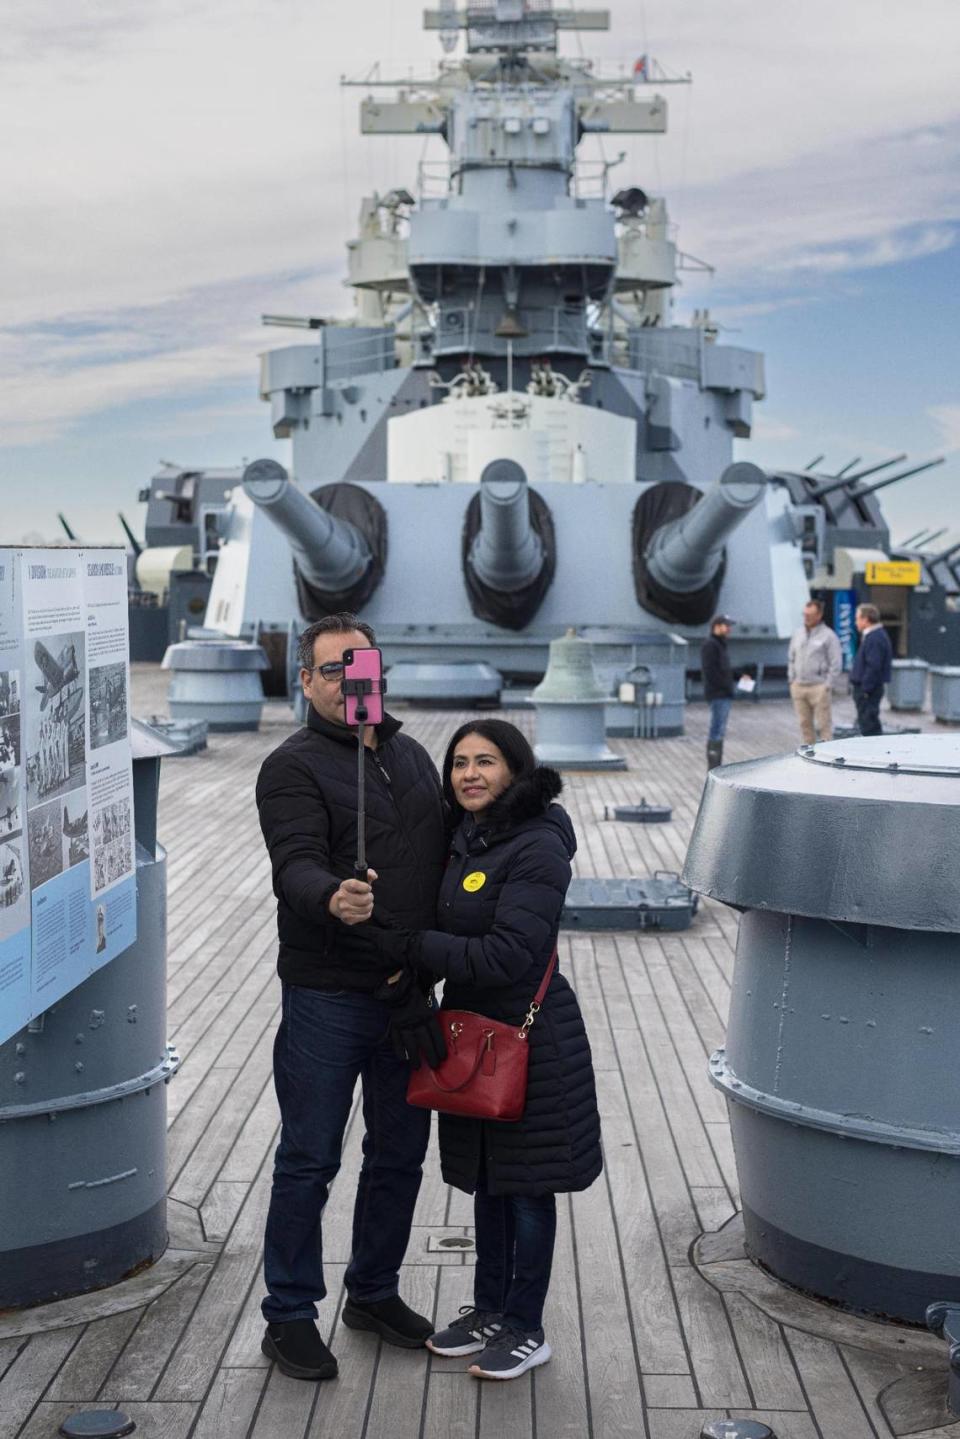 Miguel Mendoza and Iris Valerio take a selfie on the USS North Carolina in Wilmington on Nov. 28. MUST CREDIT: Justin Cook for The Washington Post